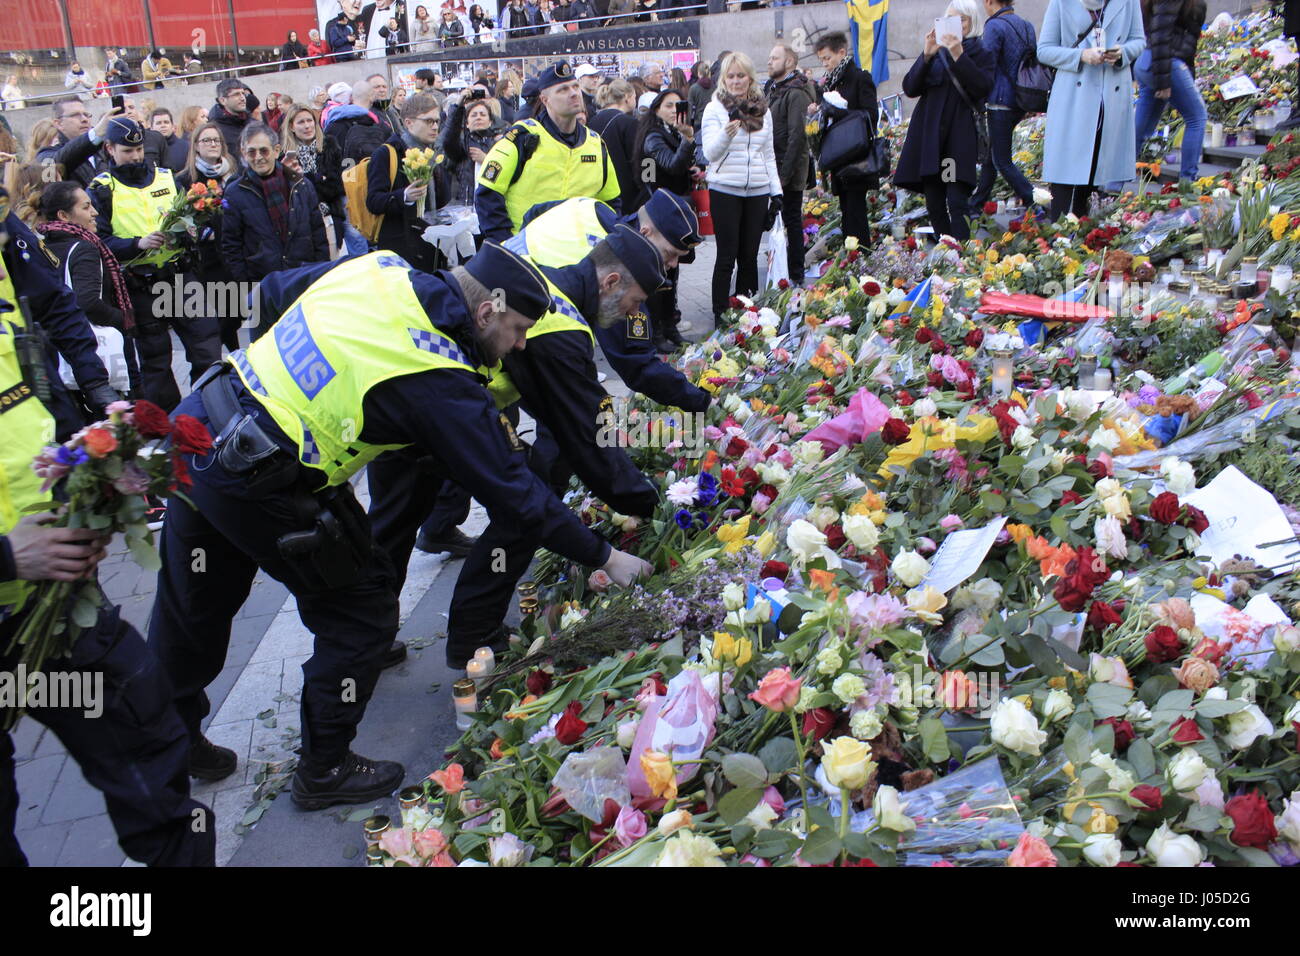 Stockholm, Sweden. 10th April, 2017. Swedish police (Polis) officers paying honor to the Stockholm terrorist attack casualties, by laying flowers at Sergels Torg square stairway, hidden under the piled colurful flowers,  condolences, hope messages, Swedish flags and burning candles. Stockholm, Sergels Torg square, Sweden Credit: BasilT/Alamy Live News Stock Photo